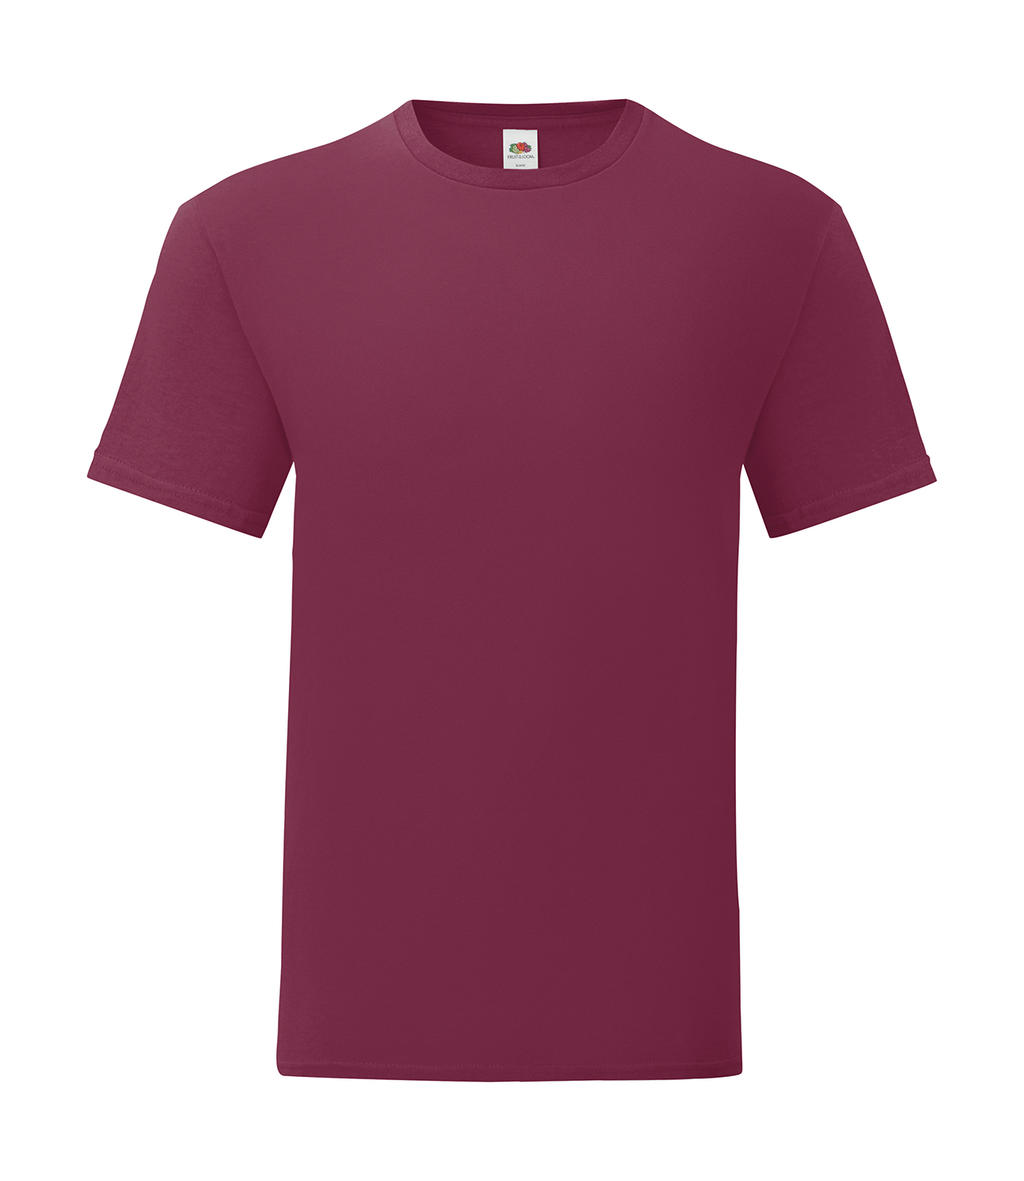  Iconic 150 T in Farbe Burgundy